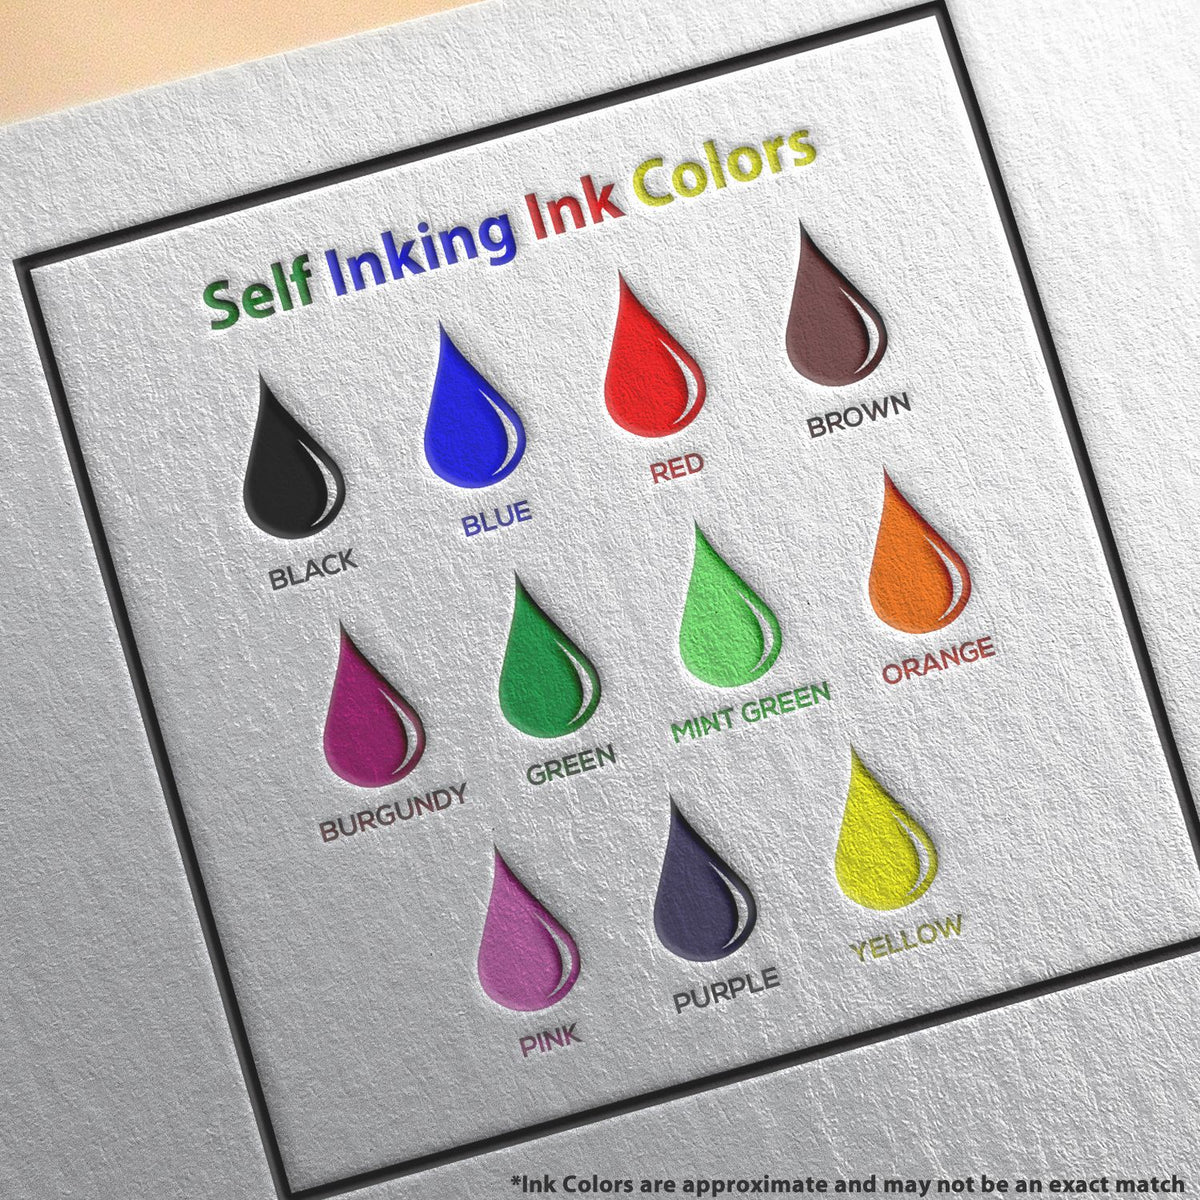 A picture showing the different ink colors or hues available for the Self-Inking Louisiana Landscape Architect Stamp product.